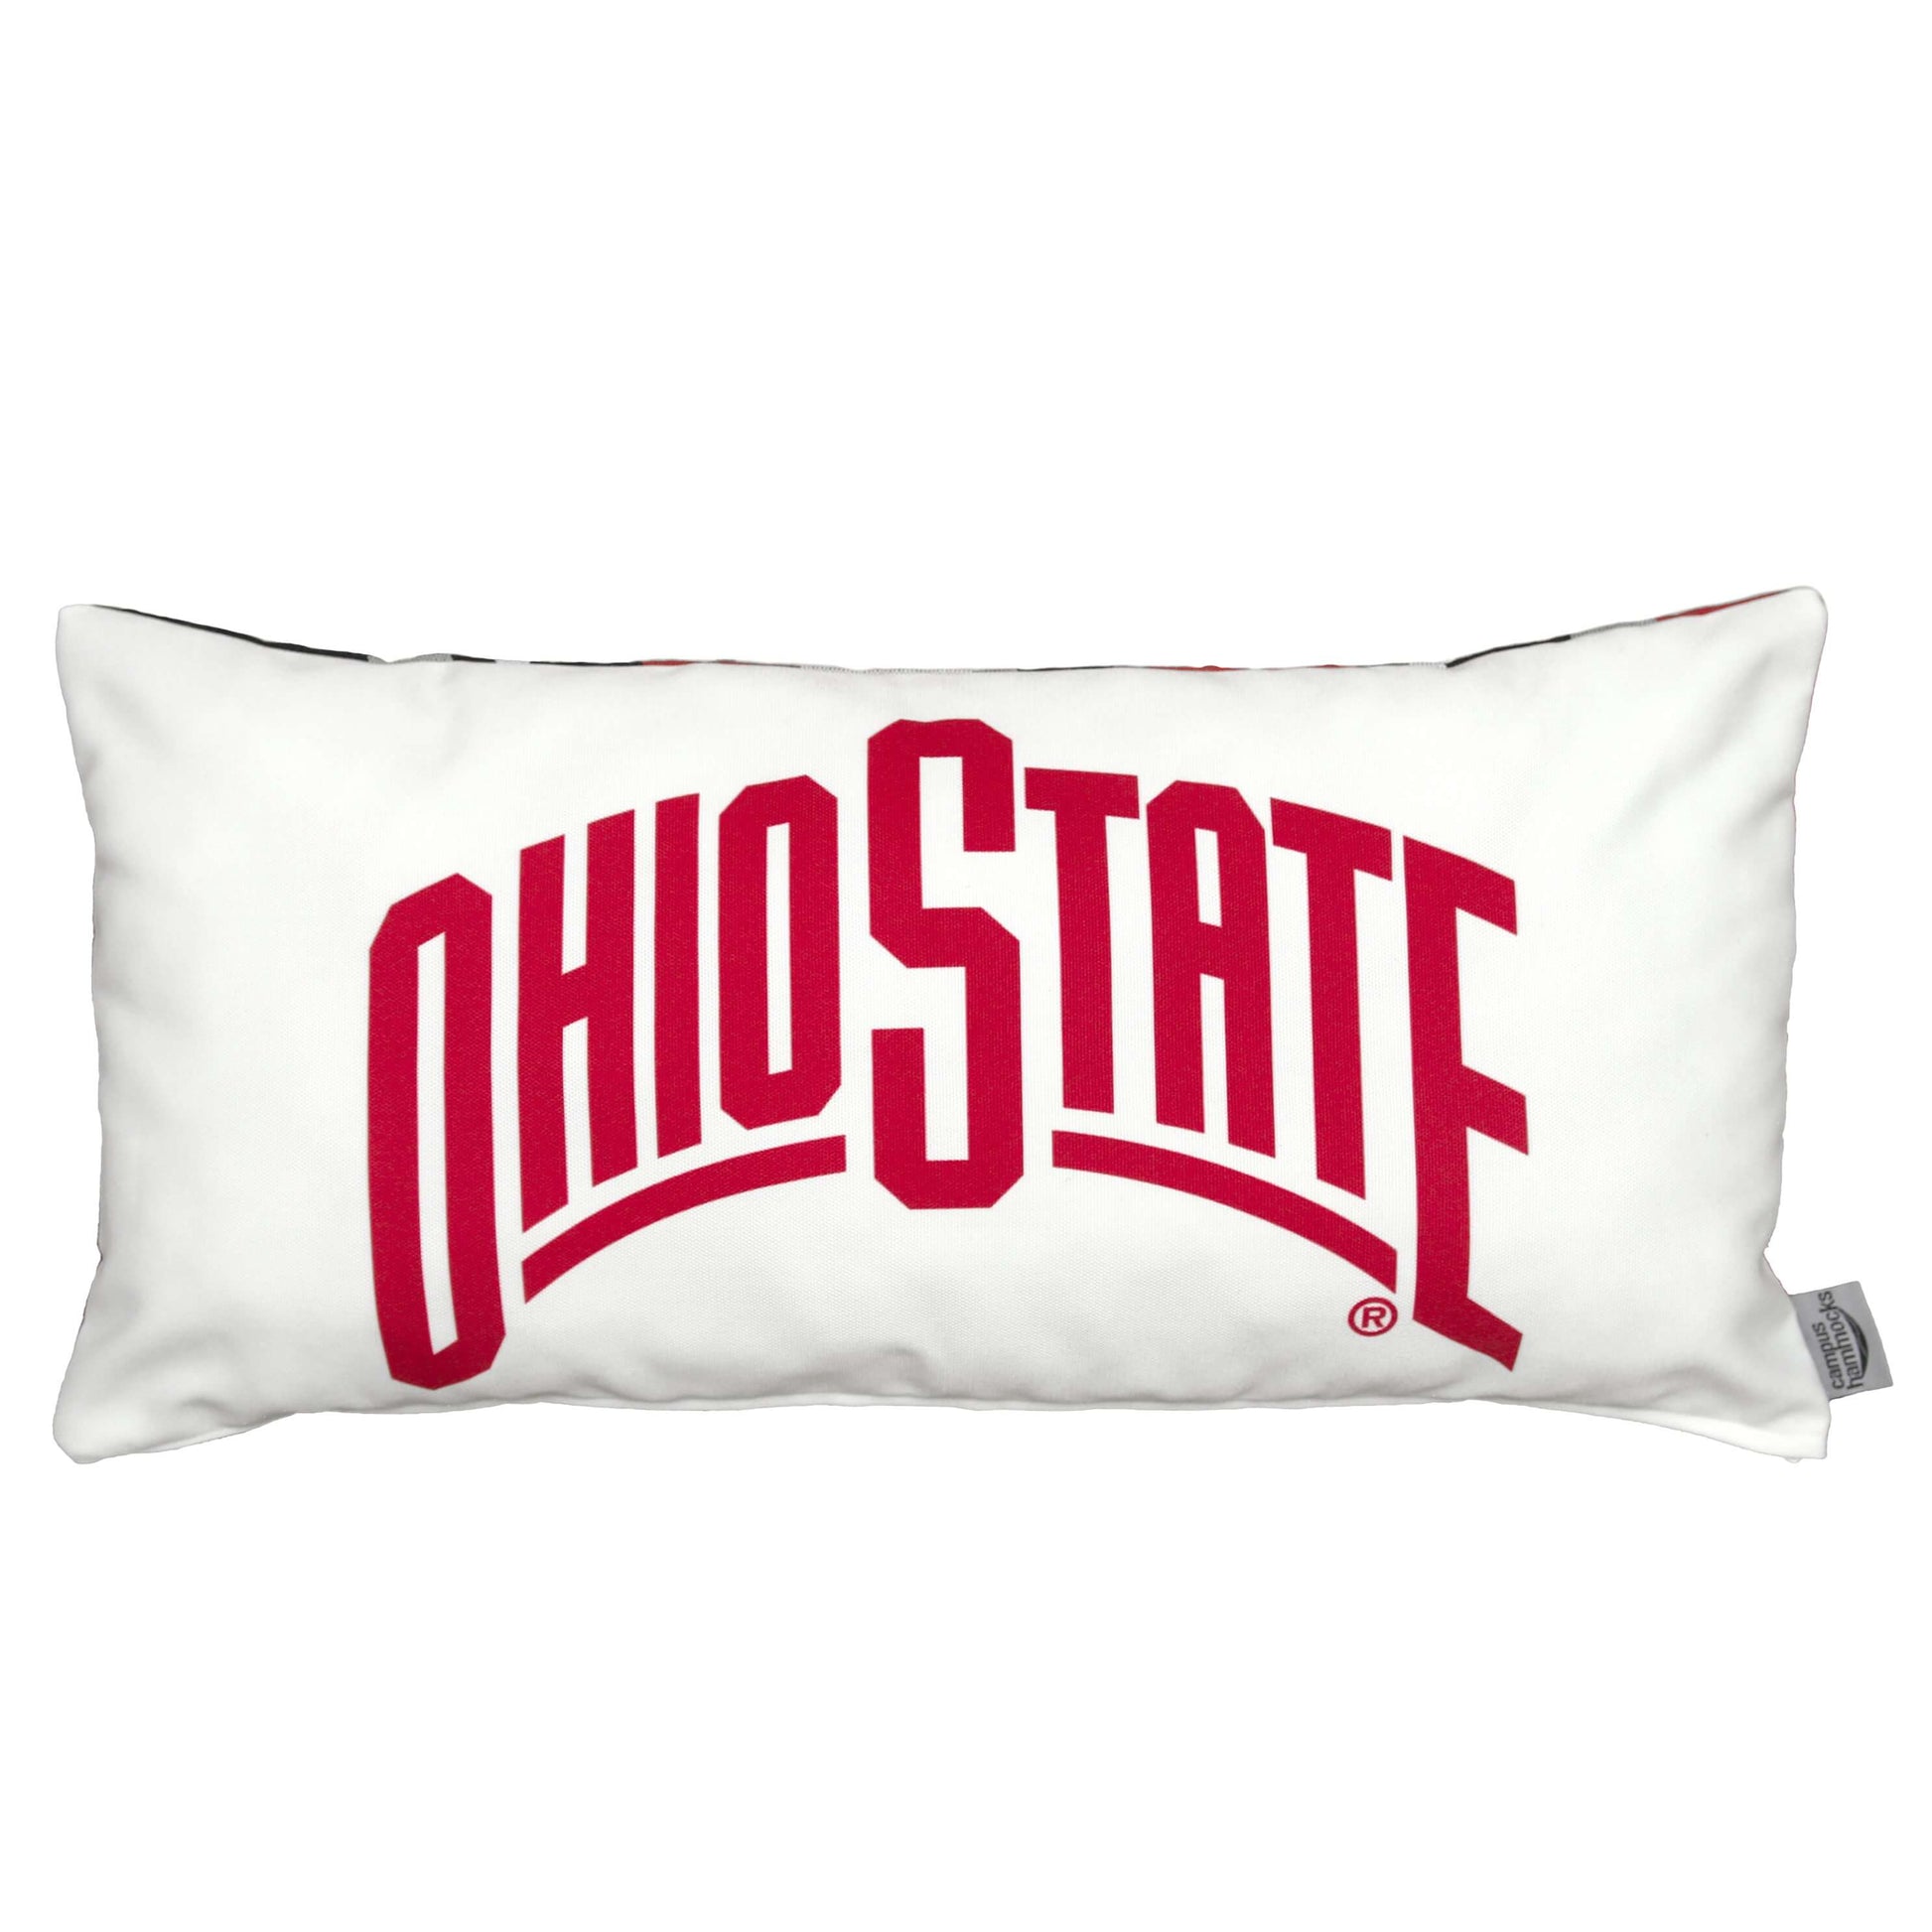 Ohio State cushion pillow lumbar with red logo